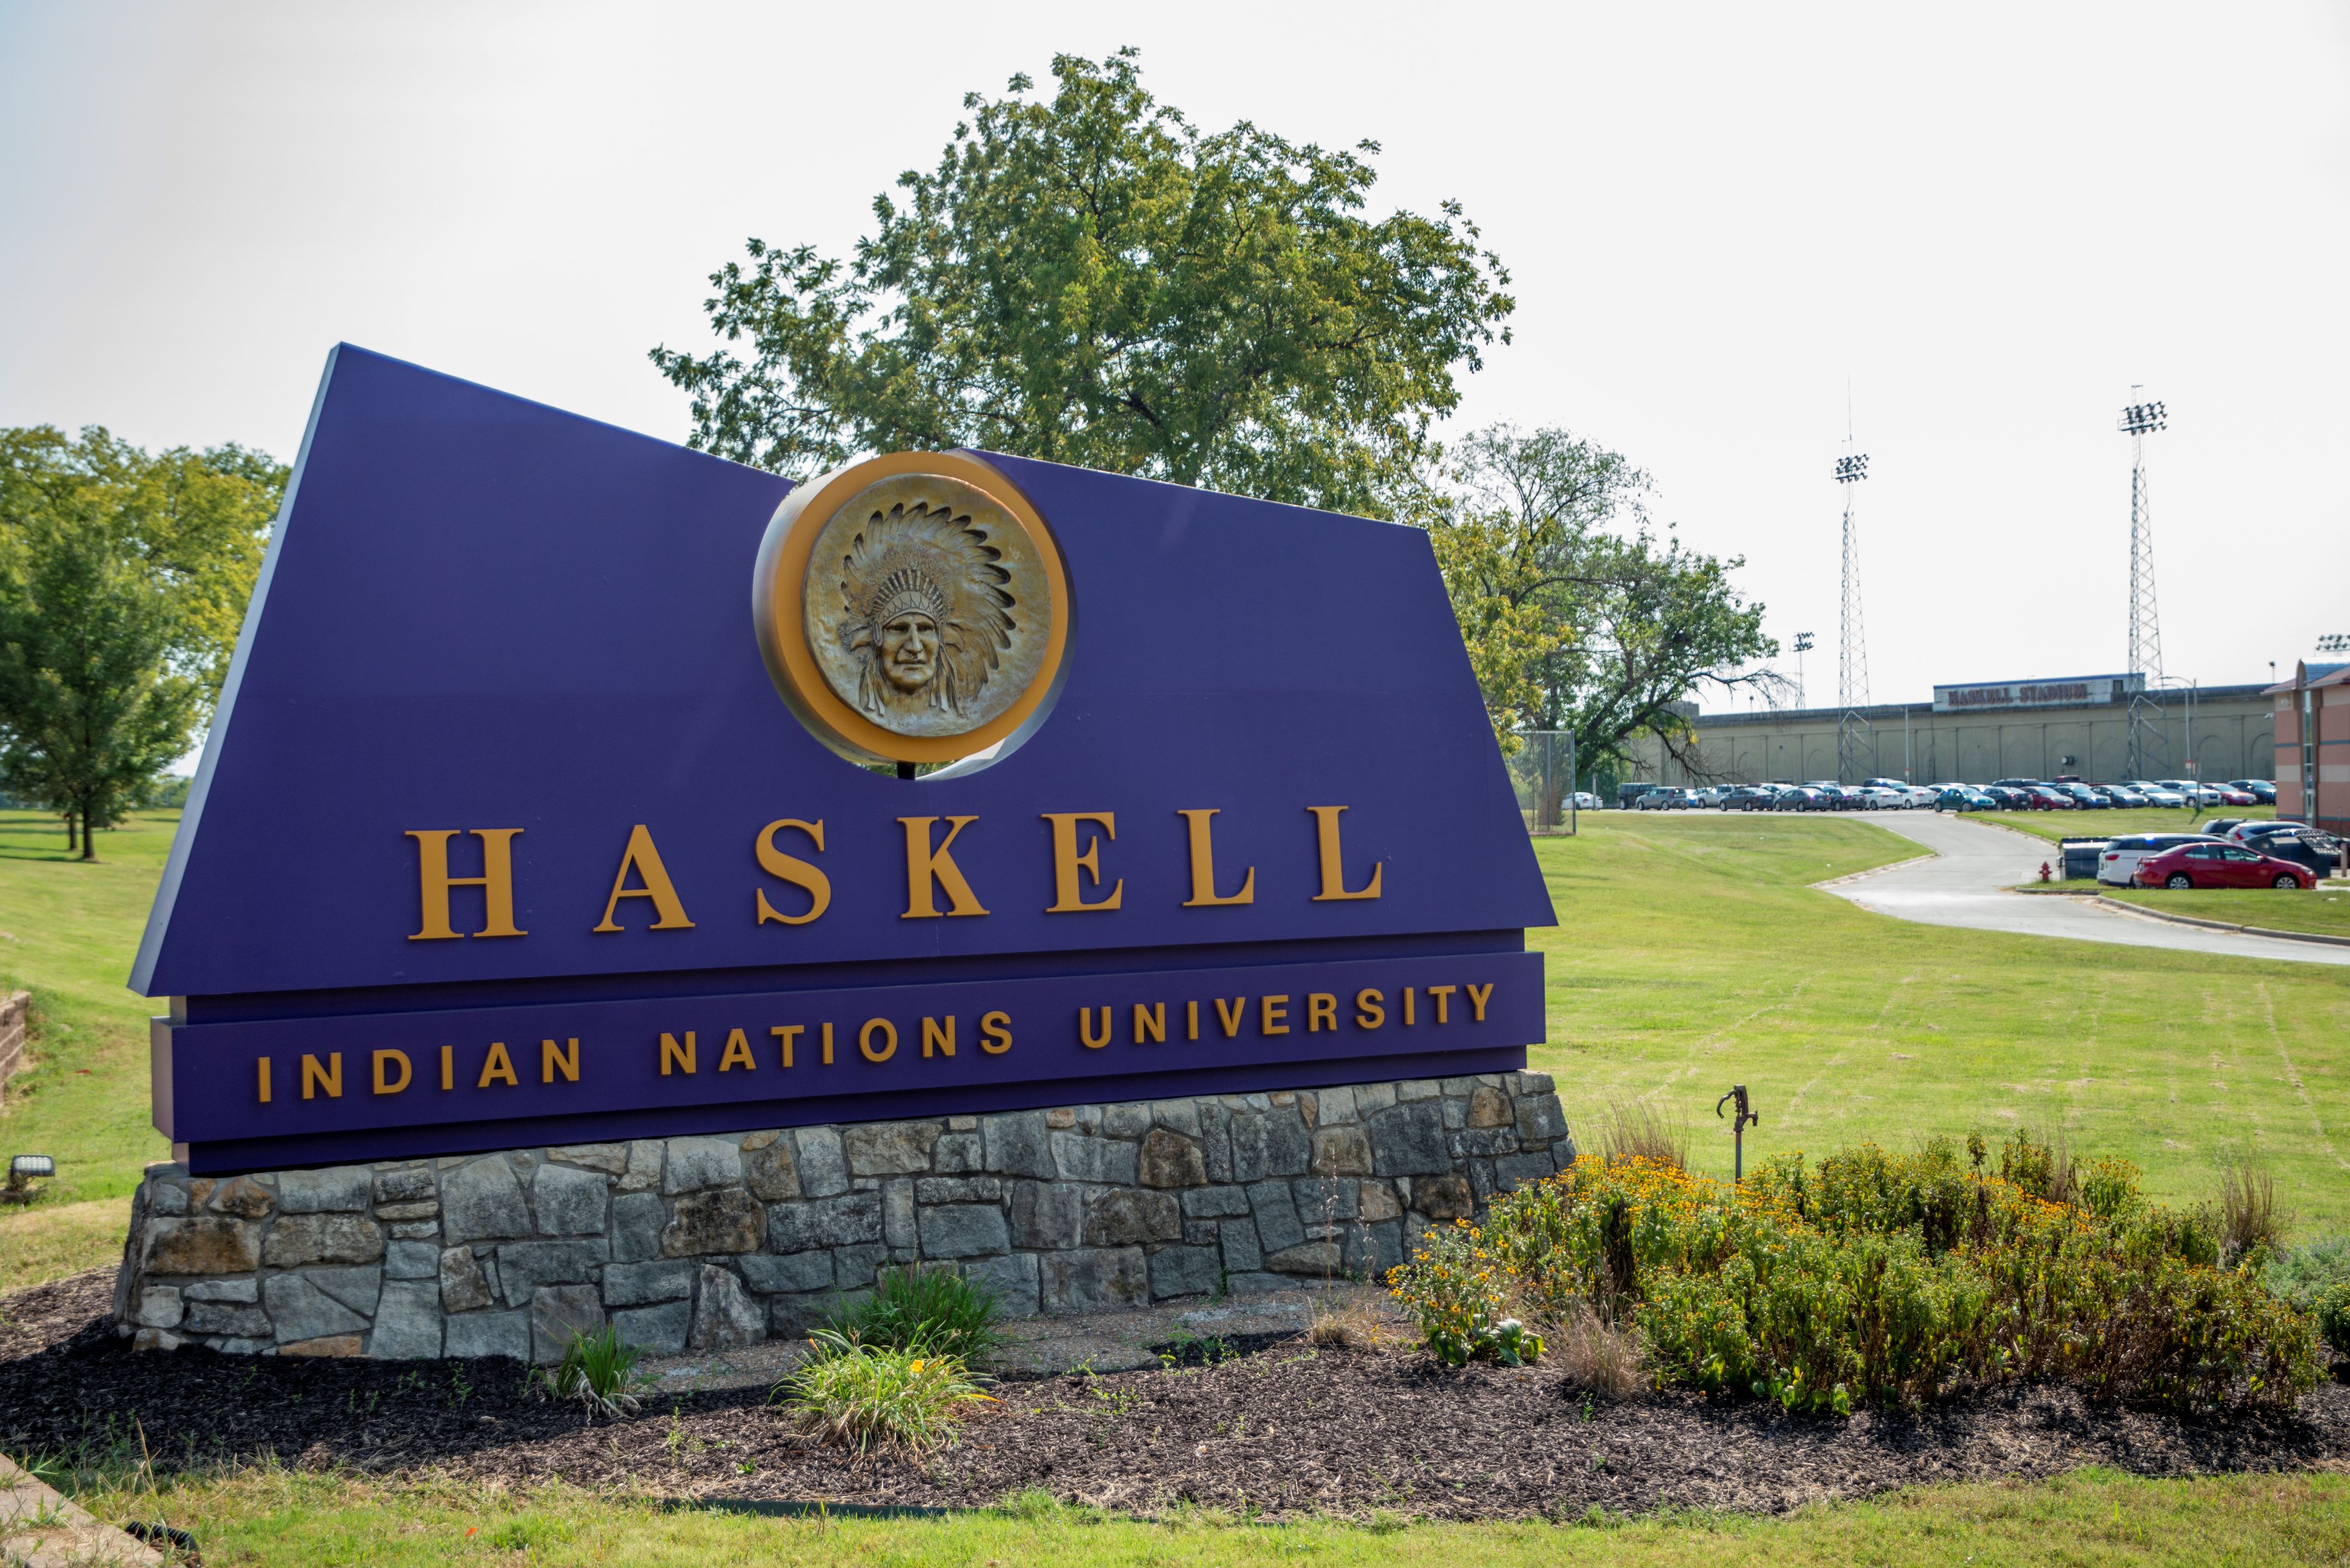 A photo of the Haskell Indian Nations University sign on campus.